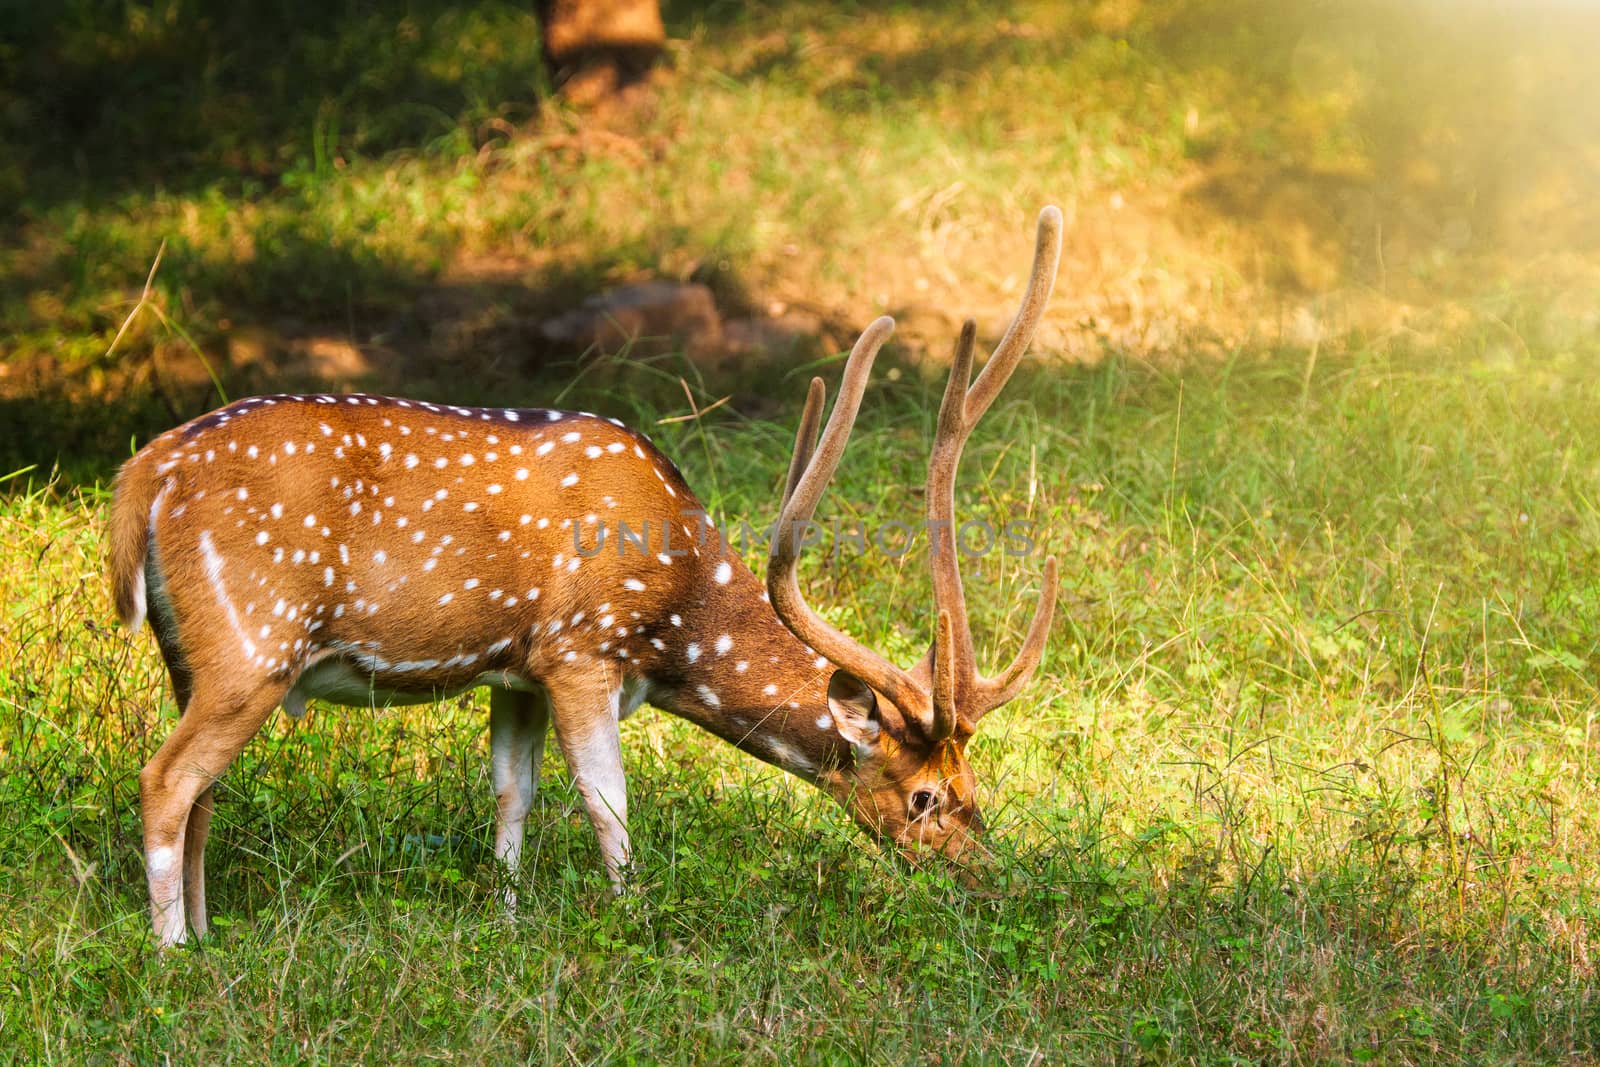 Beautiful male chital or spotted deer grazing in grass in Ranthambore National Park, Rajasthan, India